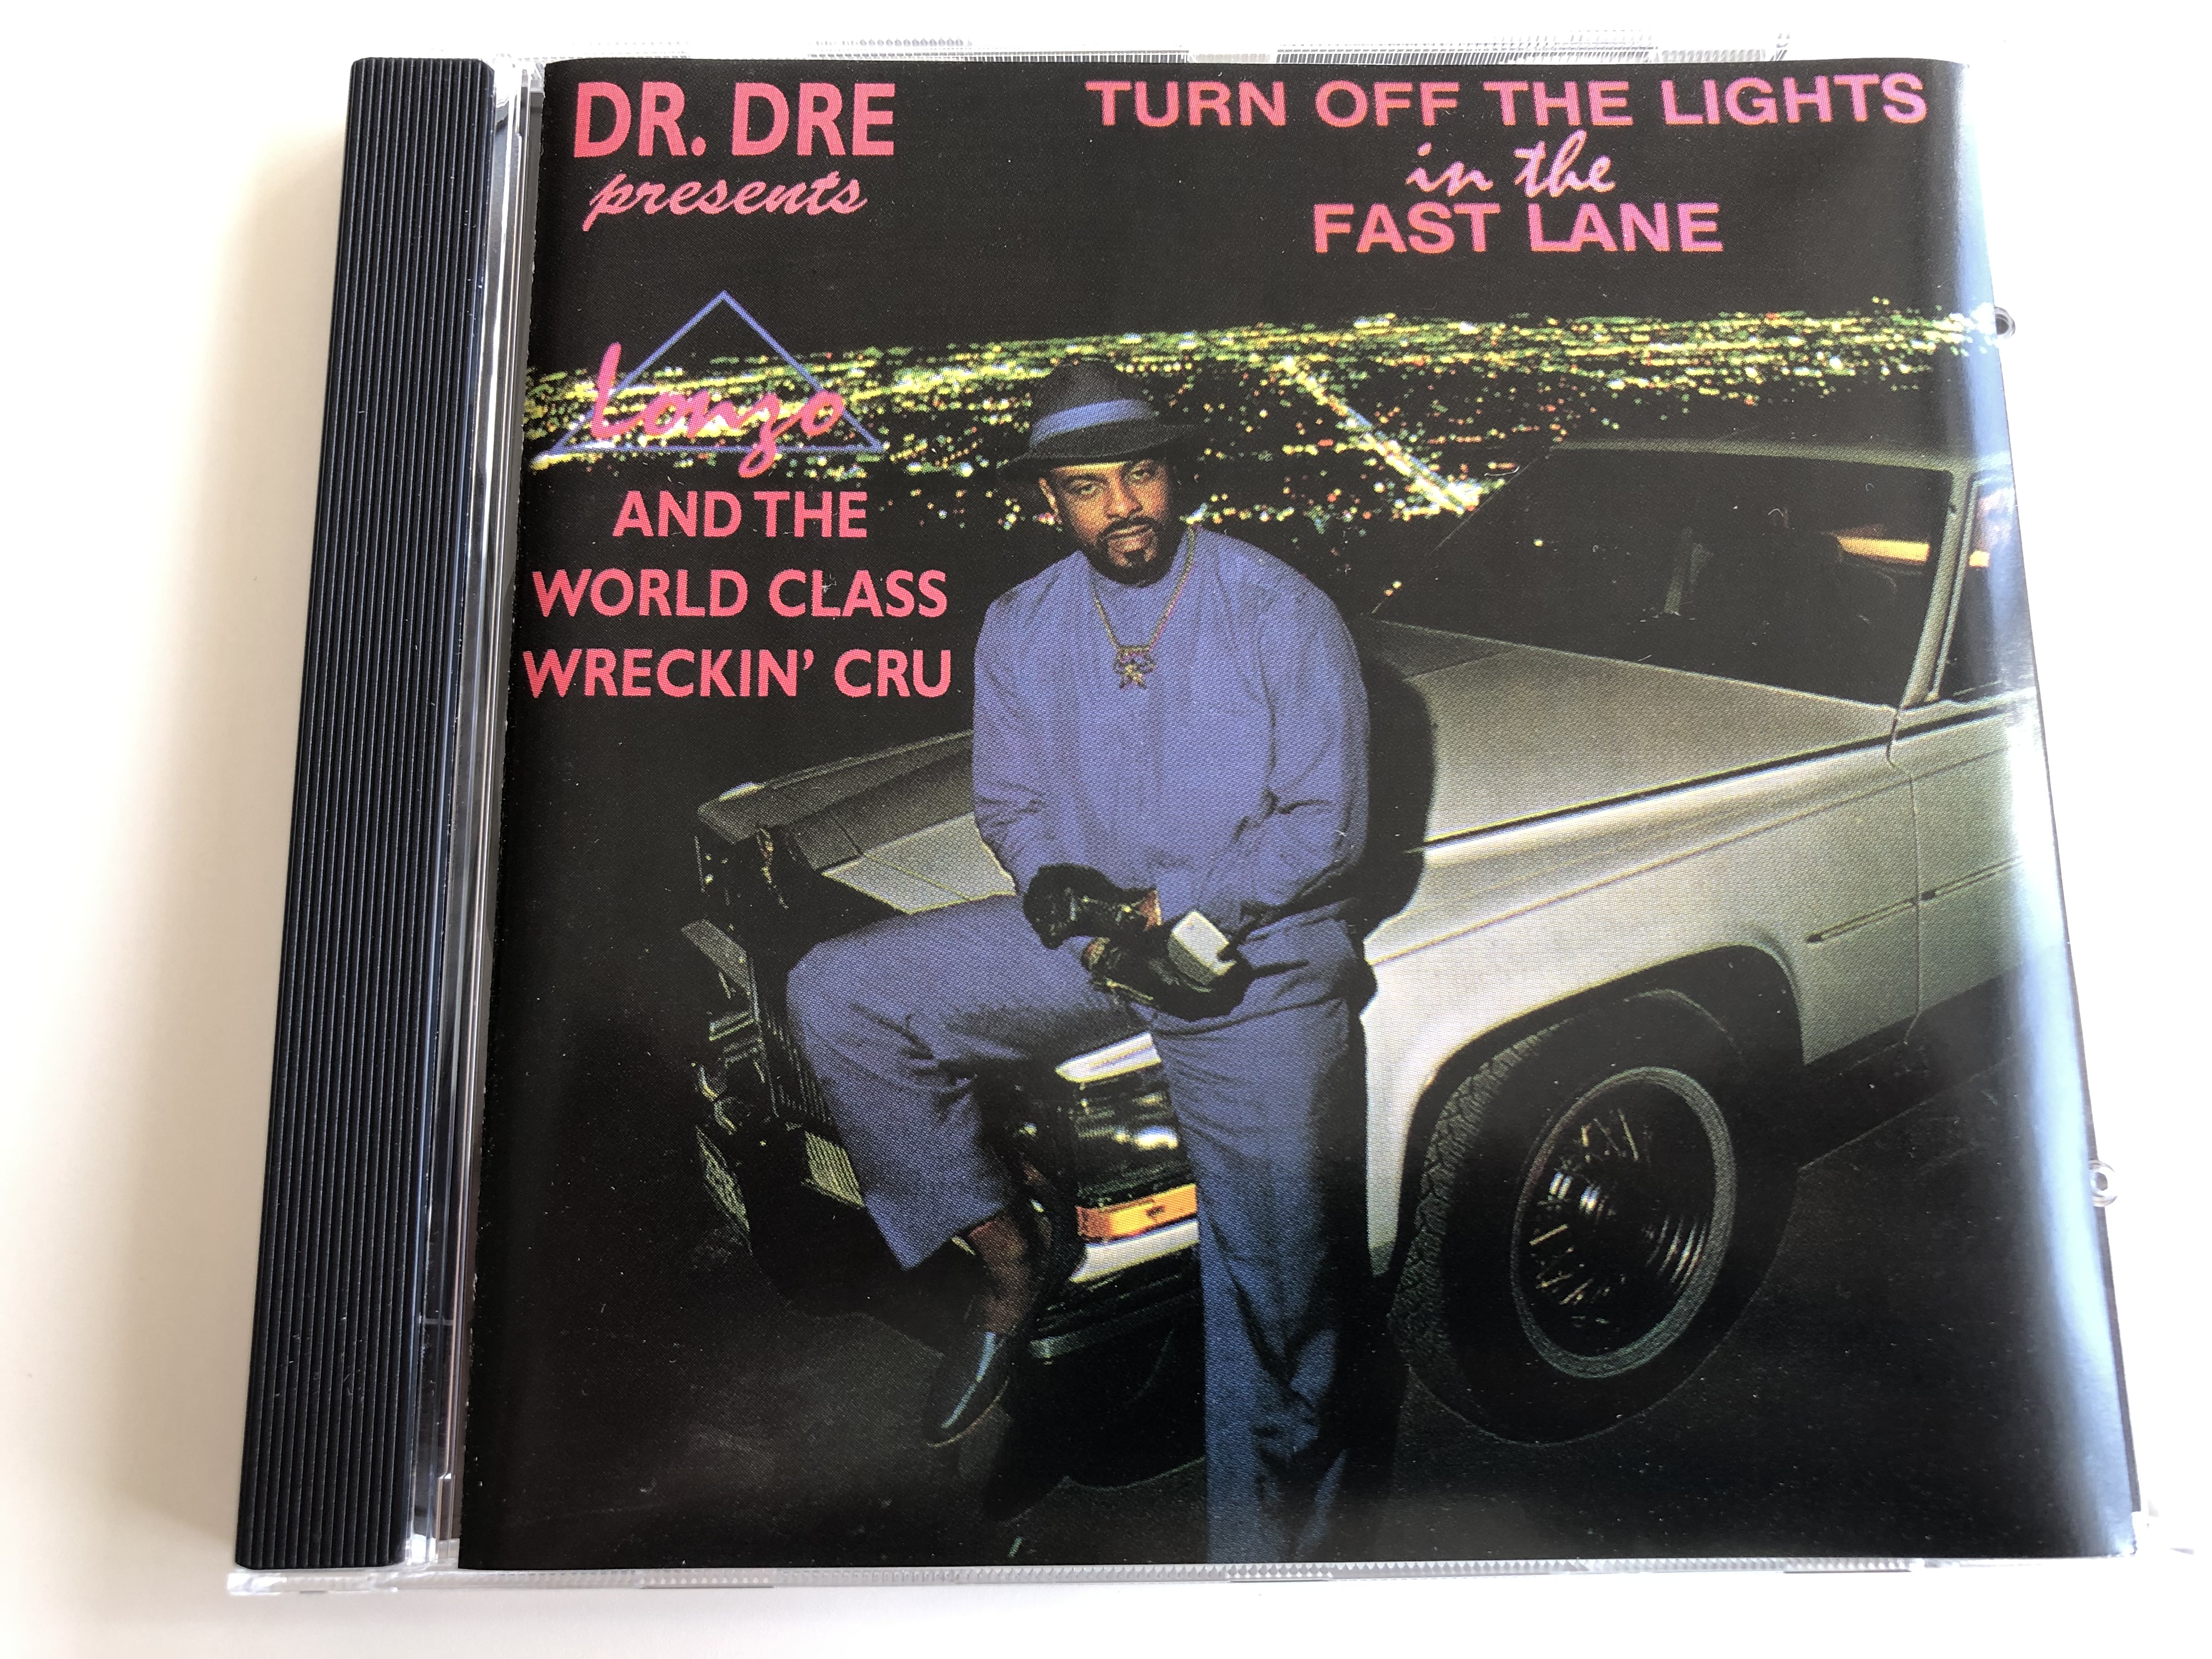 dr.-dre-presents-lonzo-and-the-world-class-wreckin-cru-turn-off-the-lights-in-the-fast-lane-street-dance-audio-cd-1998-sdr-02-7397-2-1-.jpg